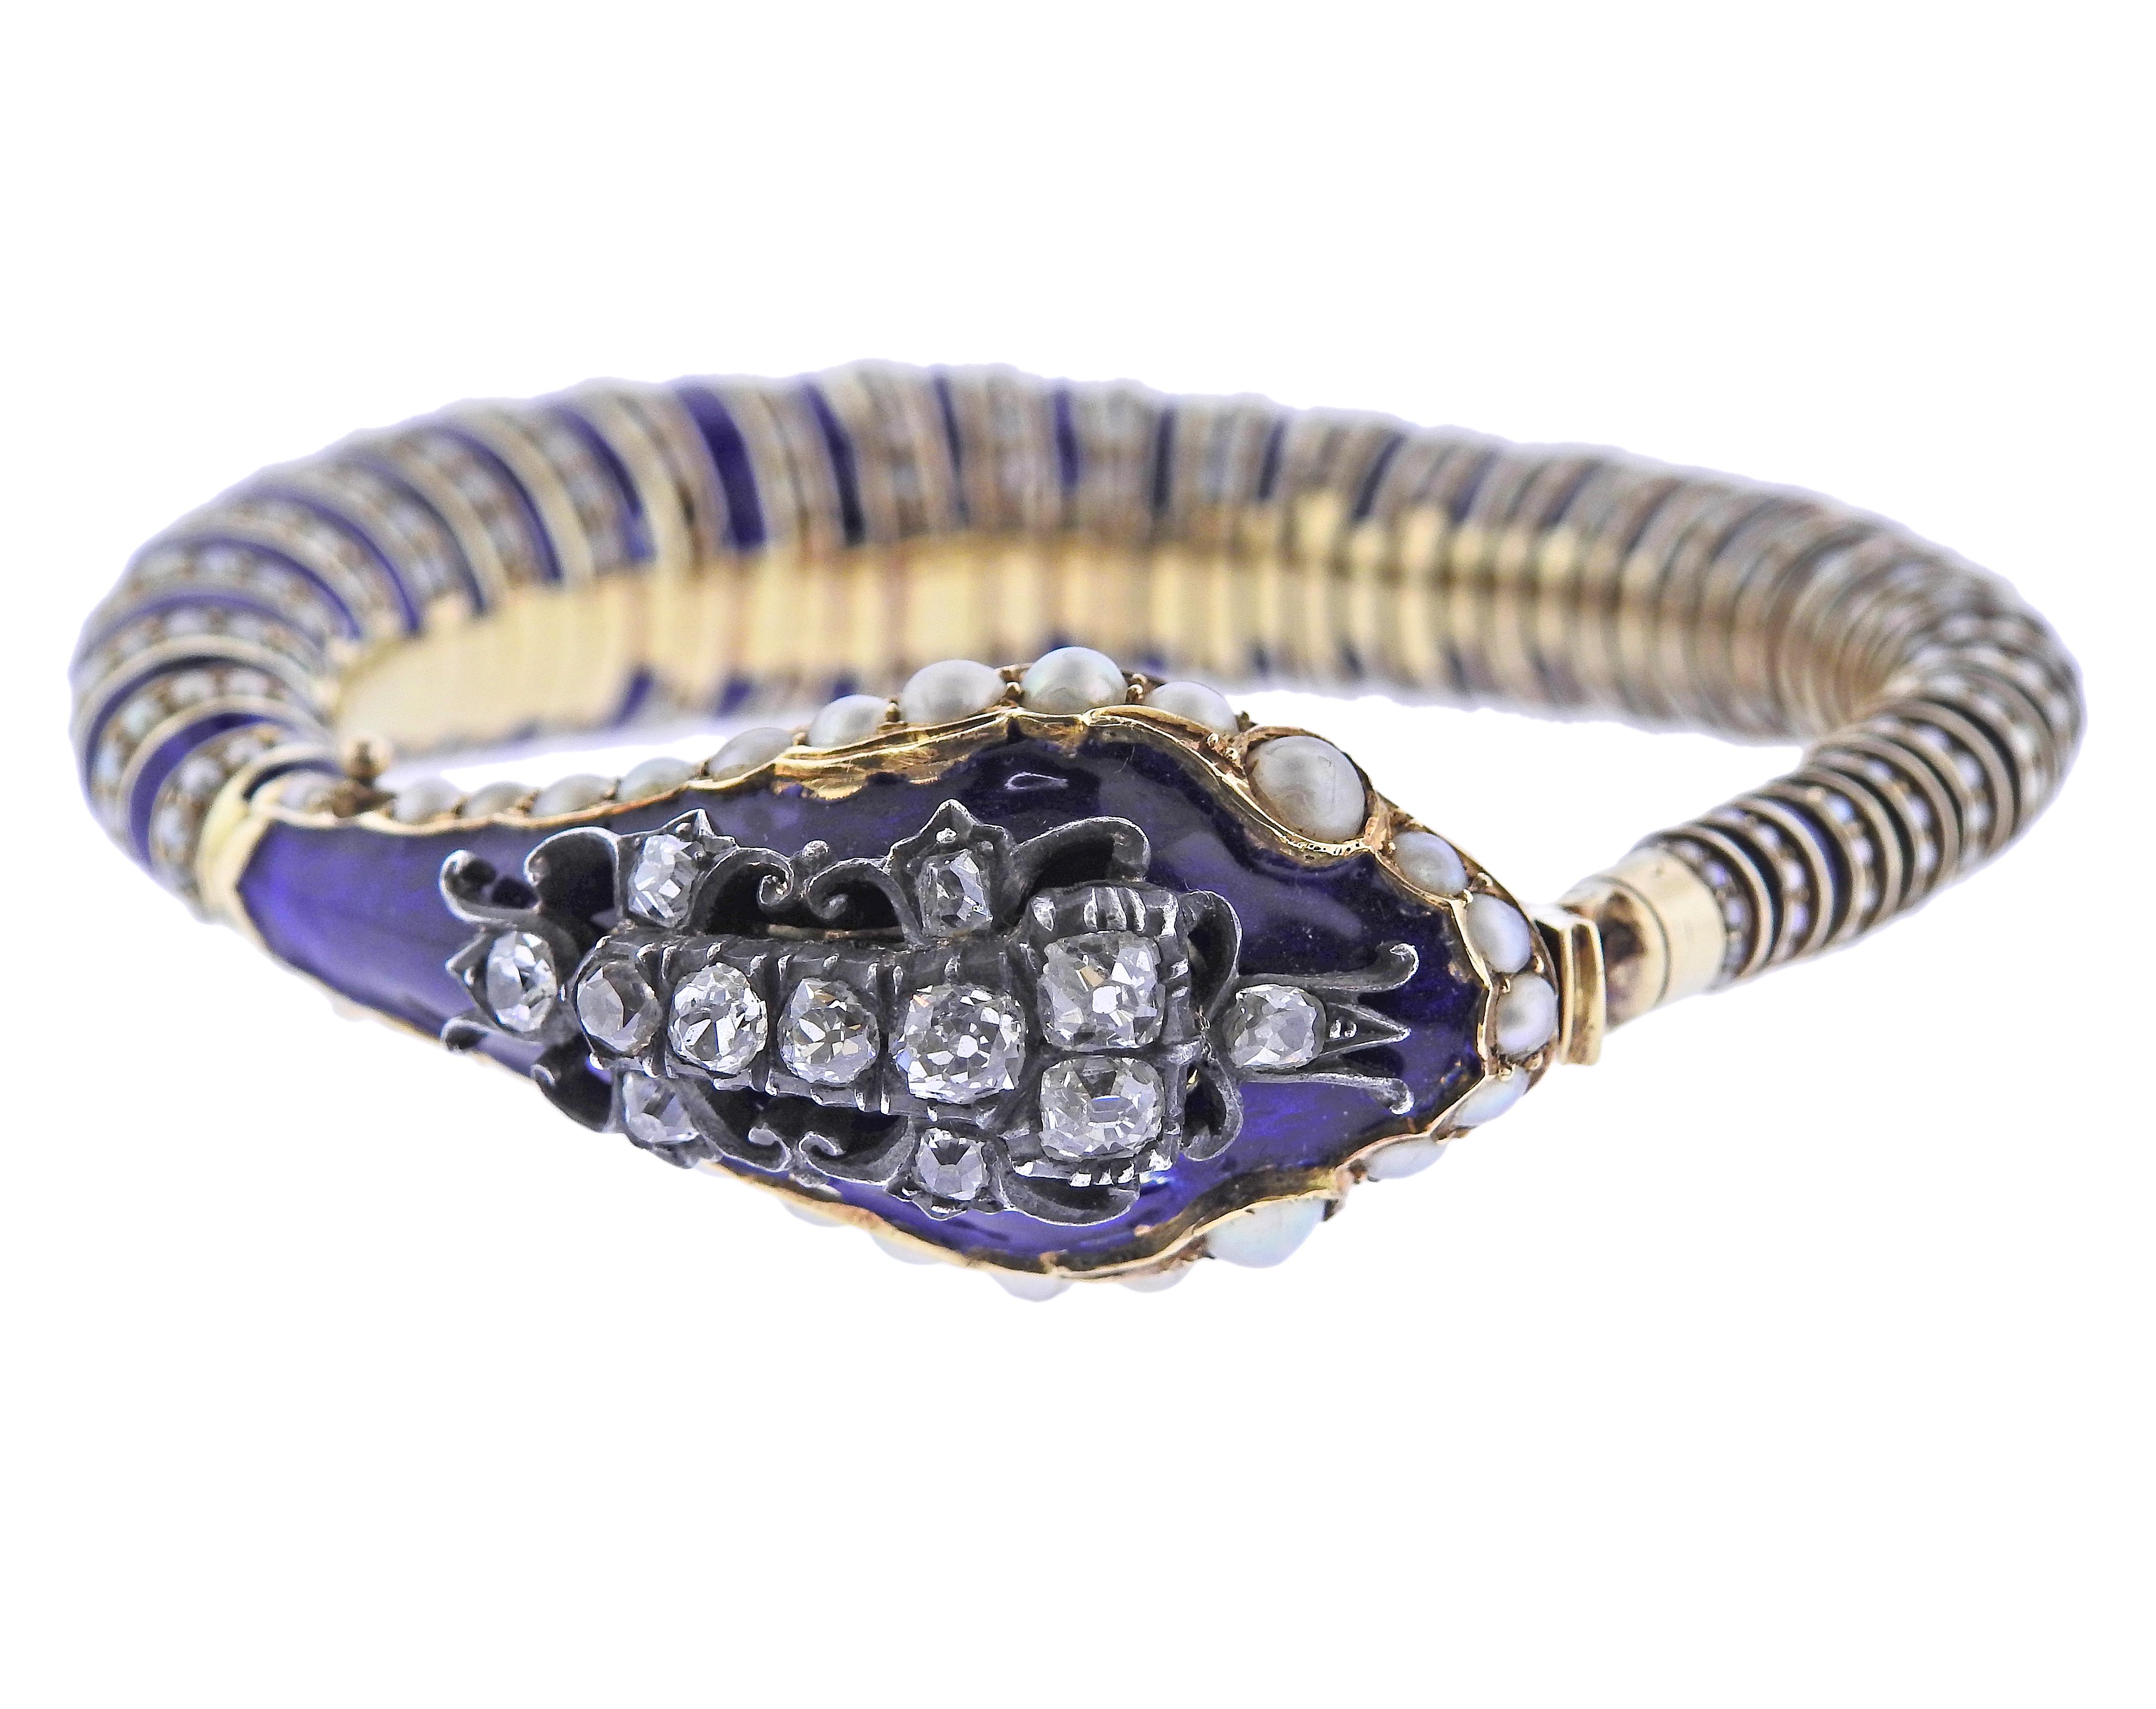 Exquisite Victorian 14k gold snake bracelet, featuring seed pearls, and old mine cut diamonds - approx. 1.20tw, with blue enamel. Bracelet is 7.25